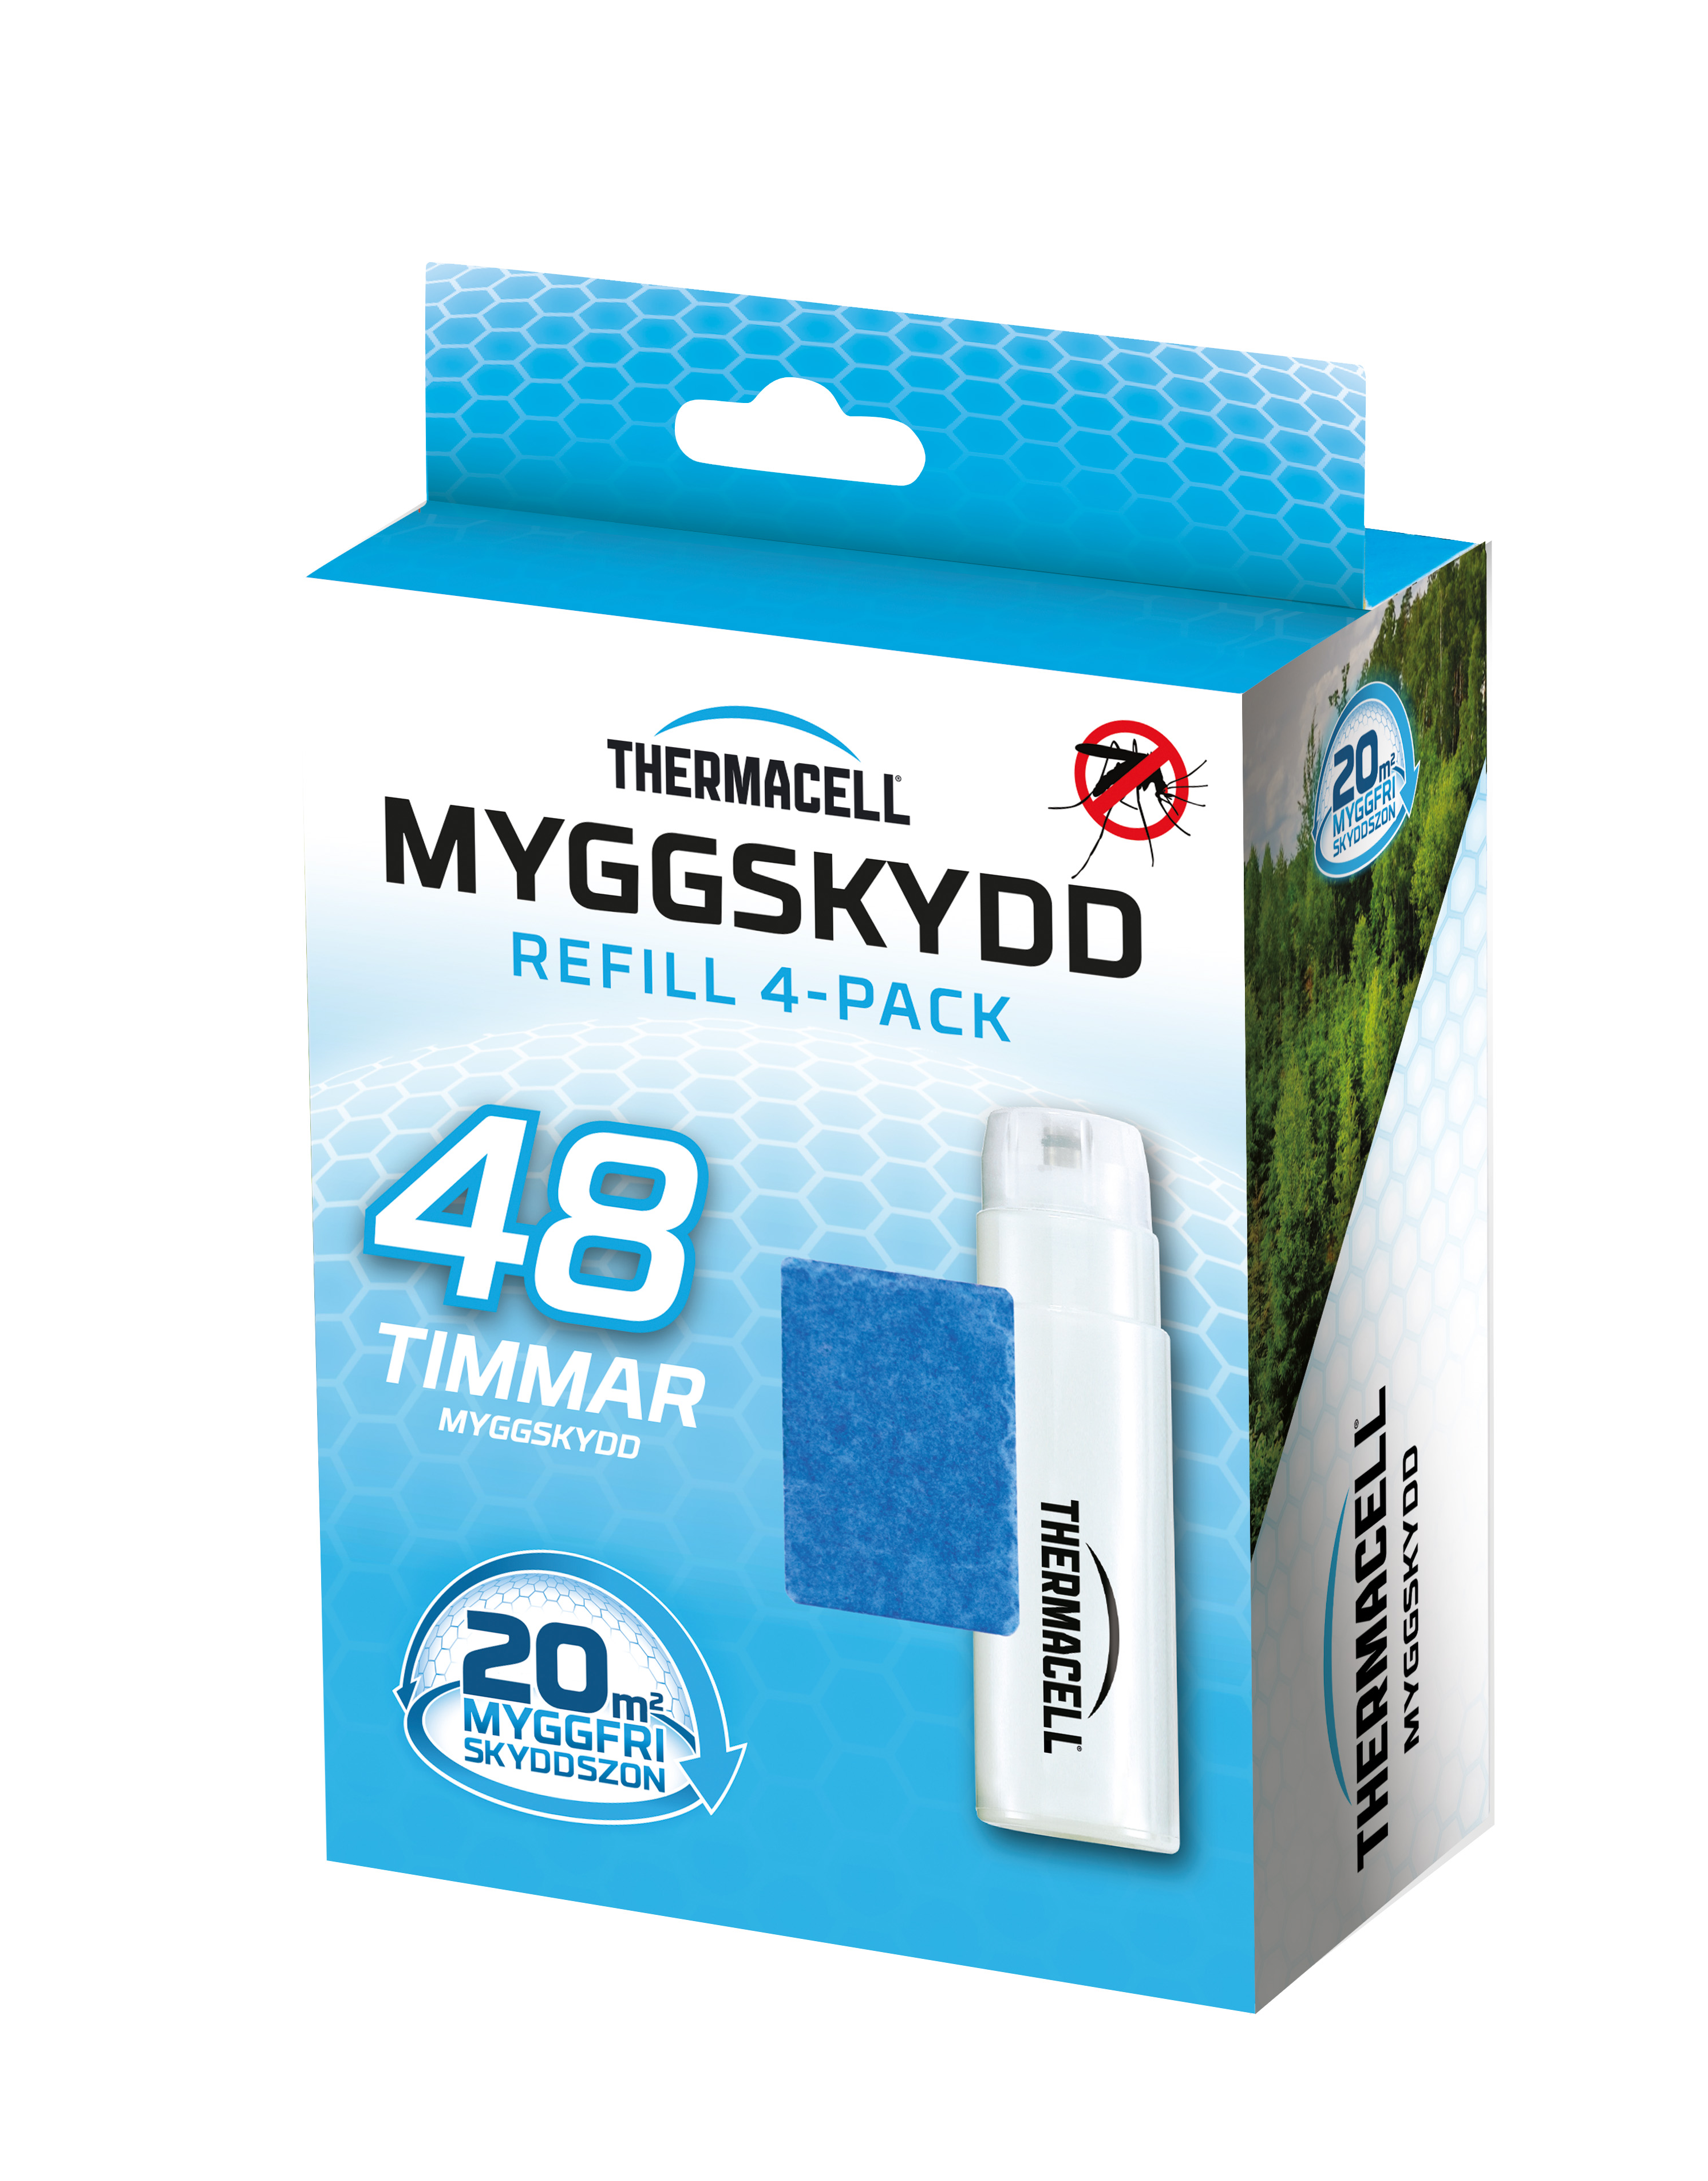 Thermacell Myggskydd Refill 48h 4-pack